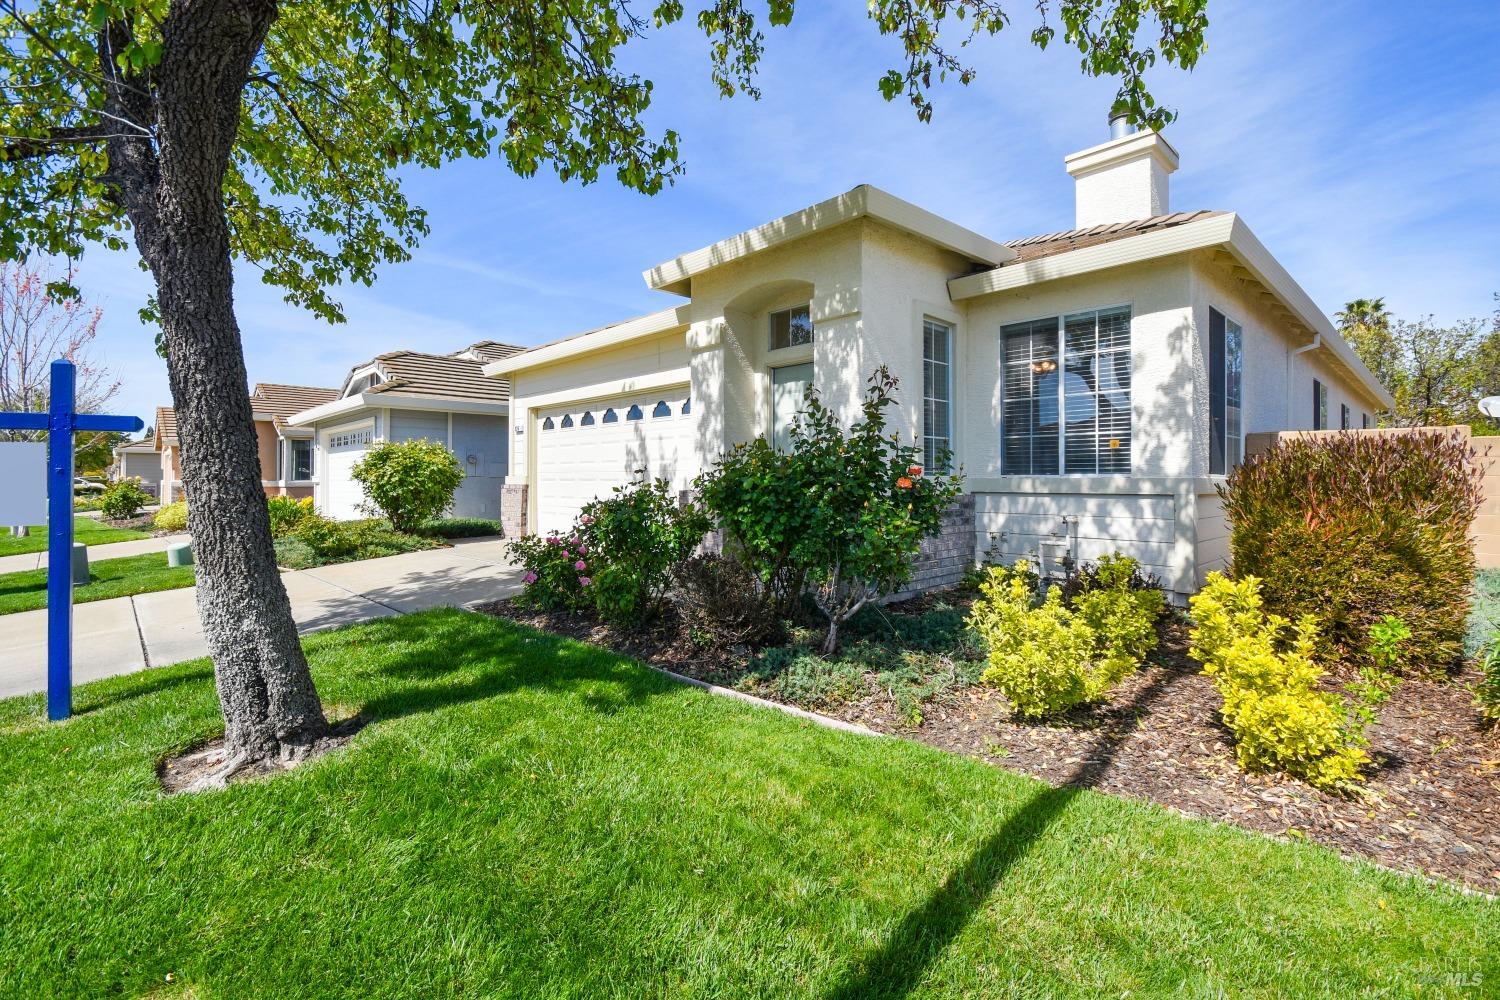 Photo of 326 Bartlett Ln in Vacaville, CA